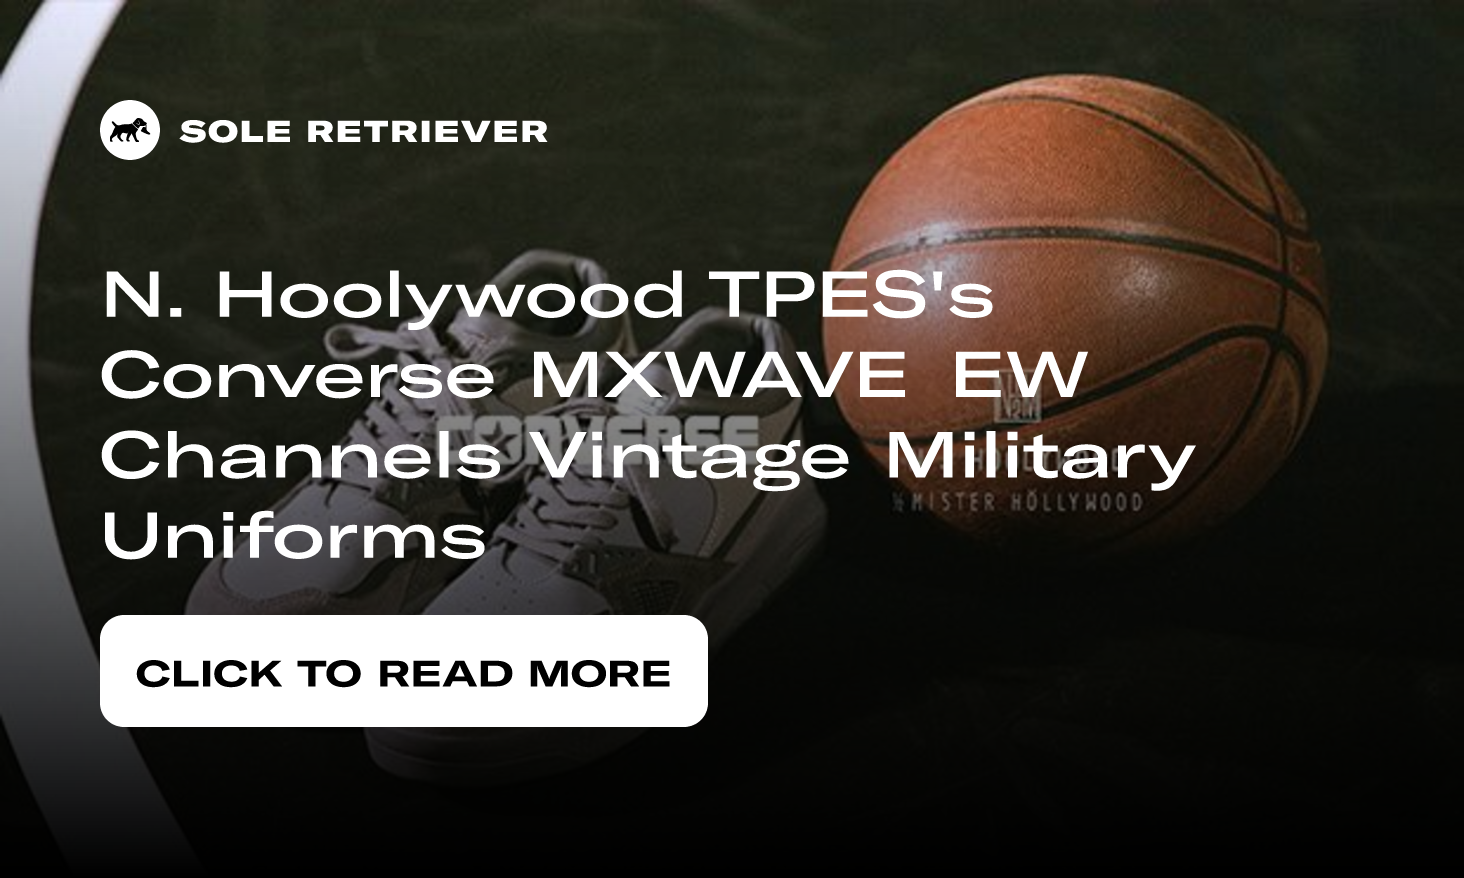 N. Hoolywood TPES's Converse MXWAVE EW Channels Vintage Military